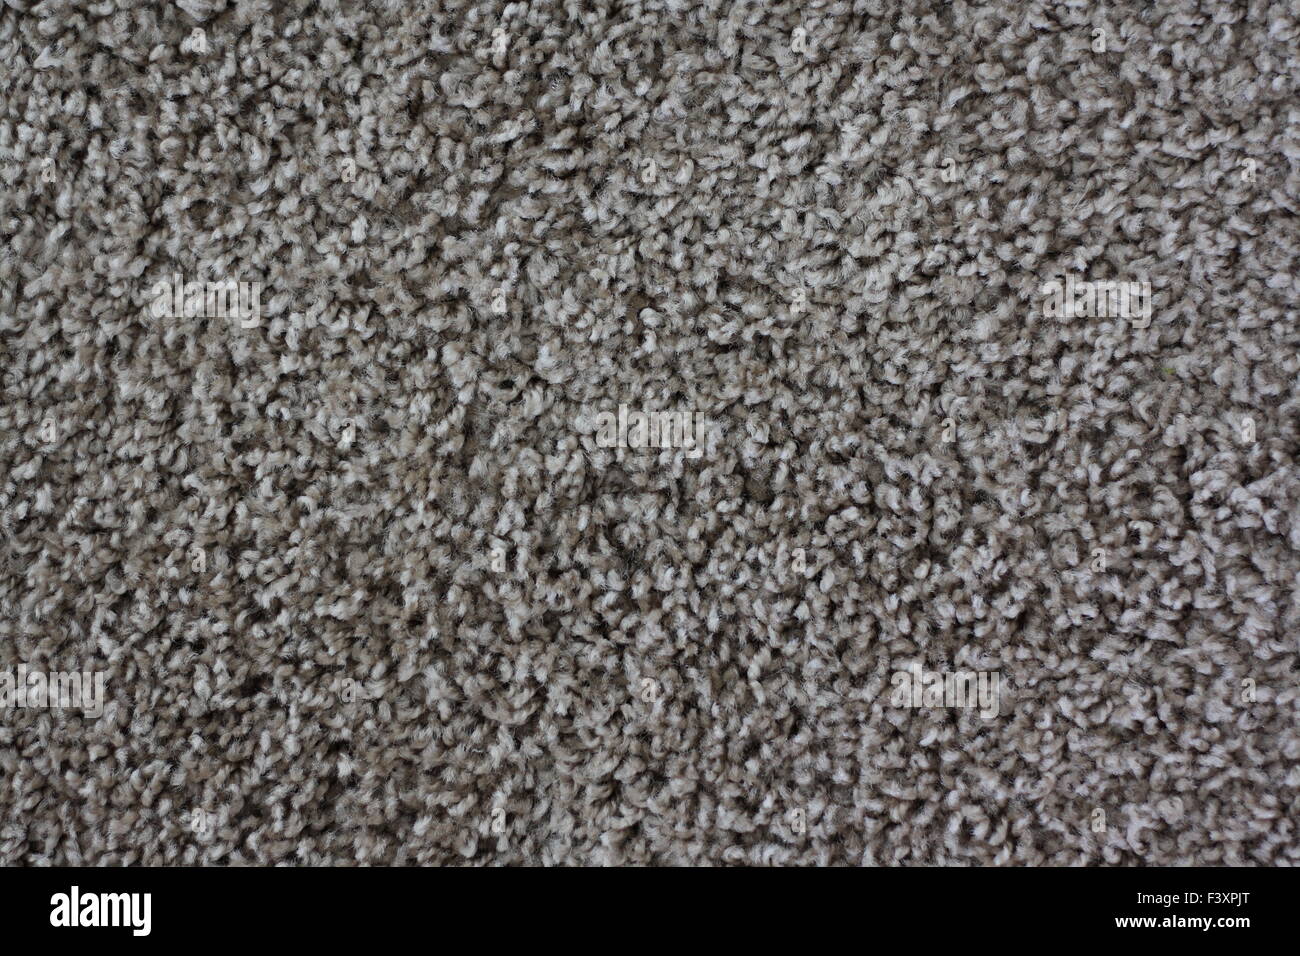 gray carpeting in close-up as background Stock Photo